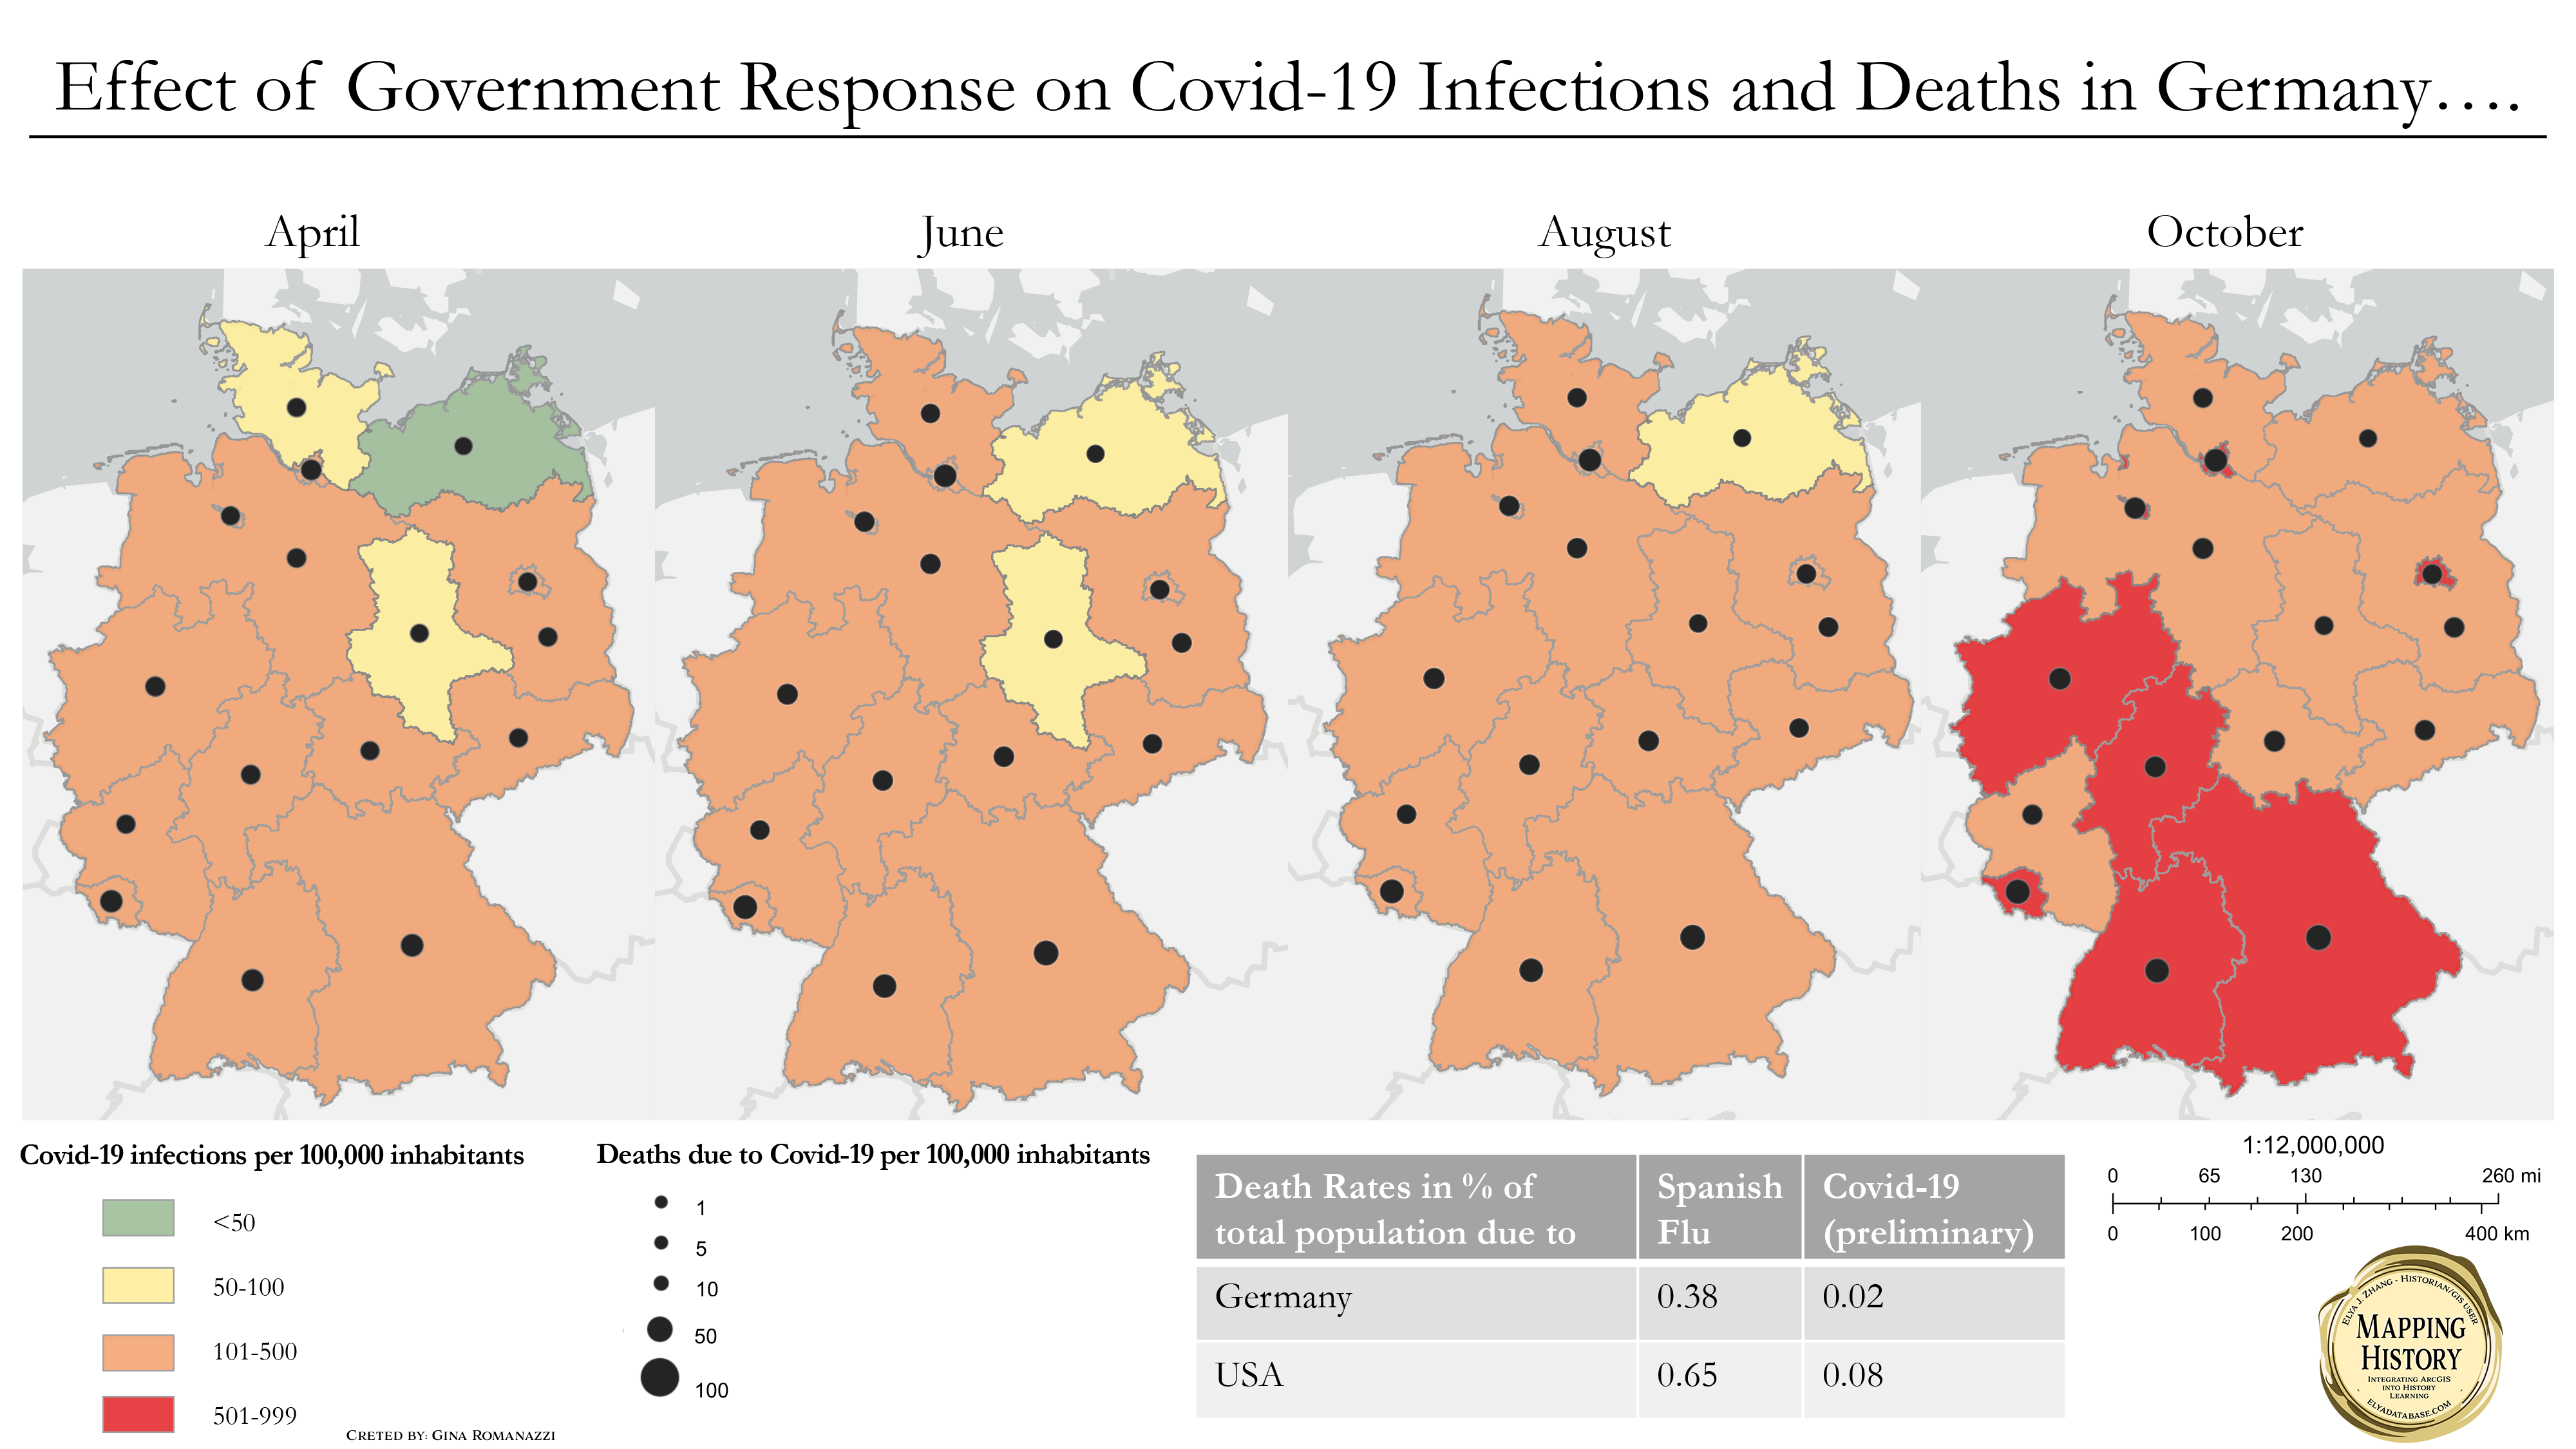 Effect of Government Response on Covid-19 Infections and Deaths in Germany and the United States